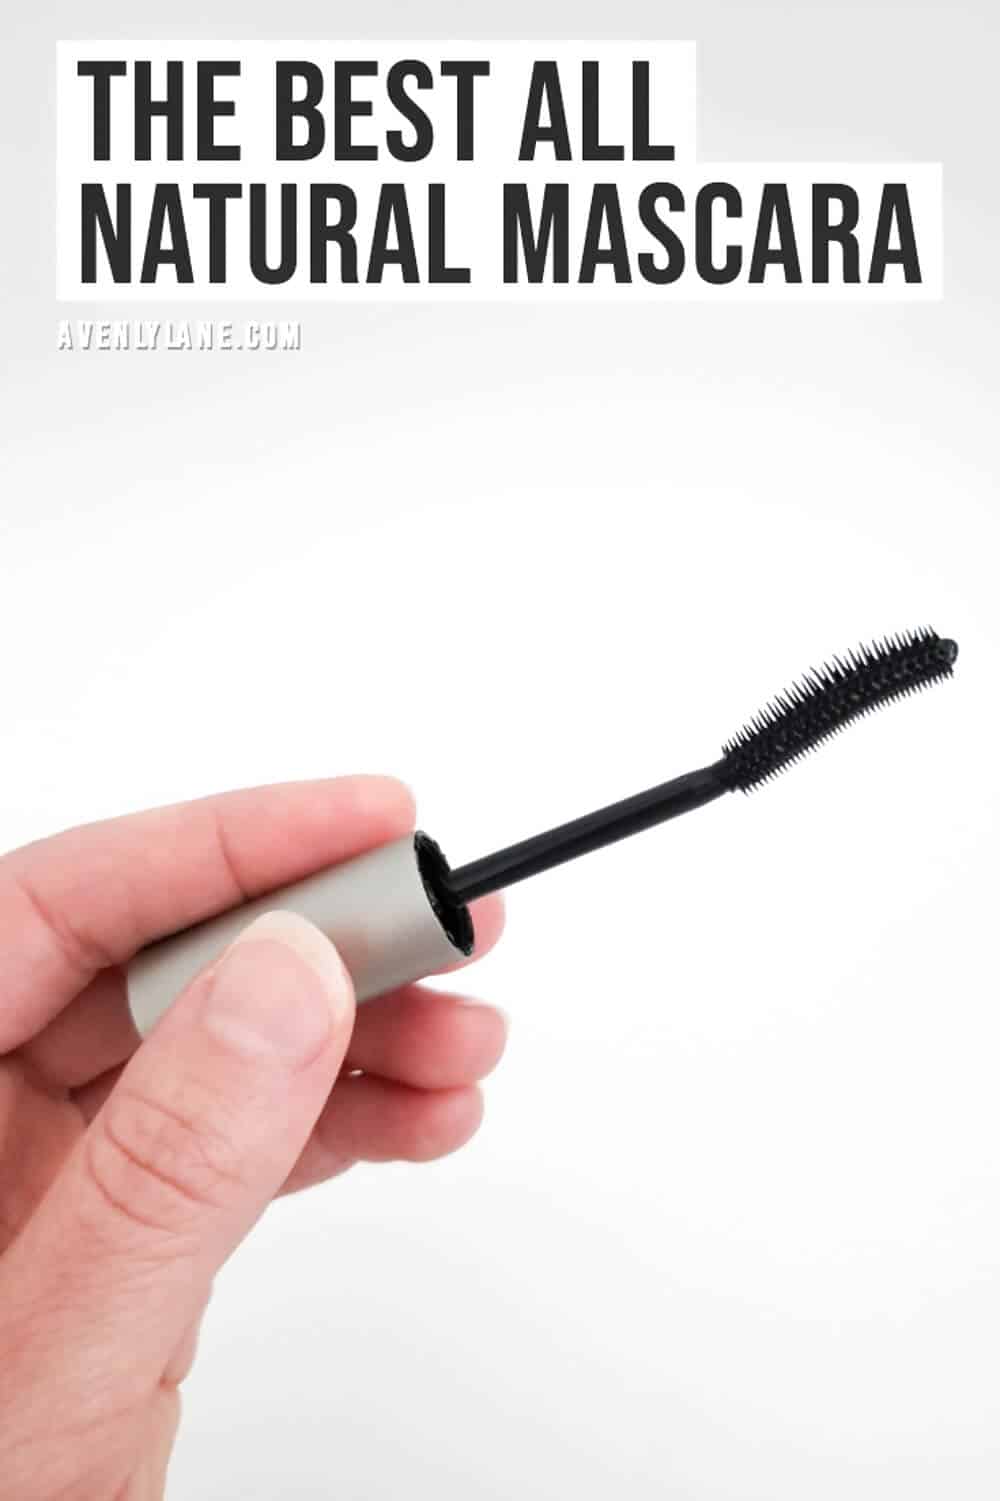 The BEST All Natural Mascara